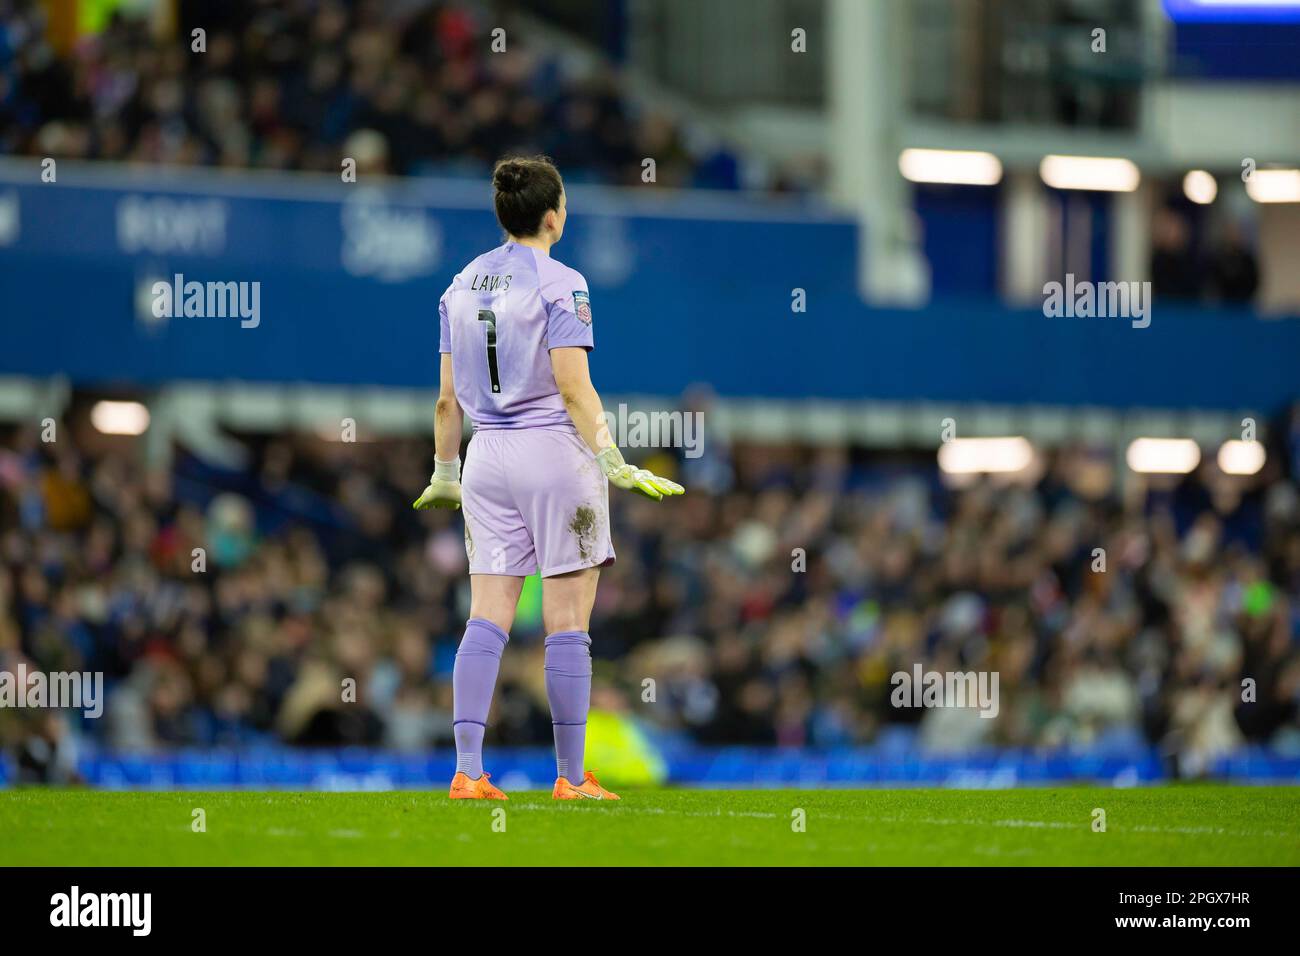 Liverpool, UK. 24th Mar, 2023. Liverpool, England, March 24th 2023: Goalkeeper Rachael Laws (1 Liverpool) urges her team to remain calm during the FA Womens Super League football match between Everton and Liverpool at Goodison Park in Liverpool, England. (James Whitehead/SPP) Credit: SPP Sport Press Photo. /Alamy Live News Stock Photo